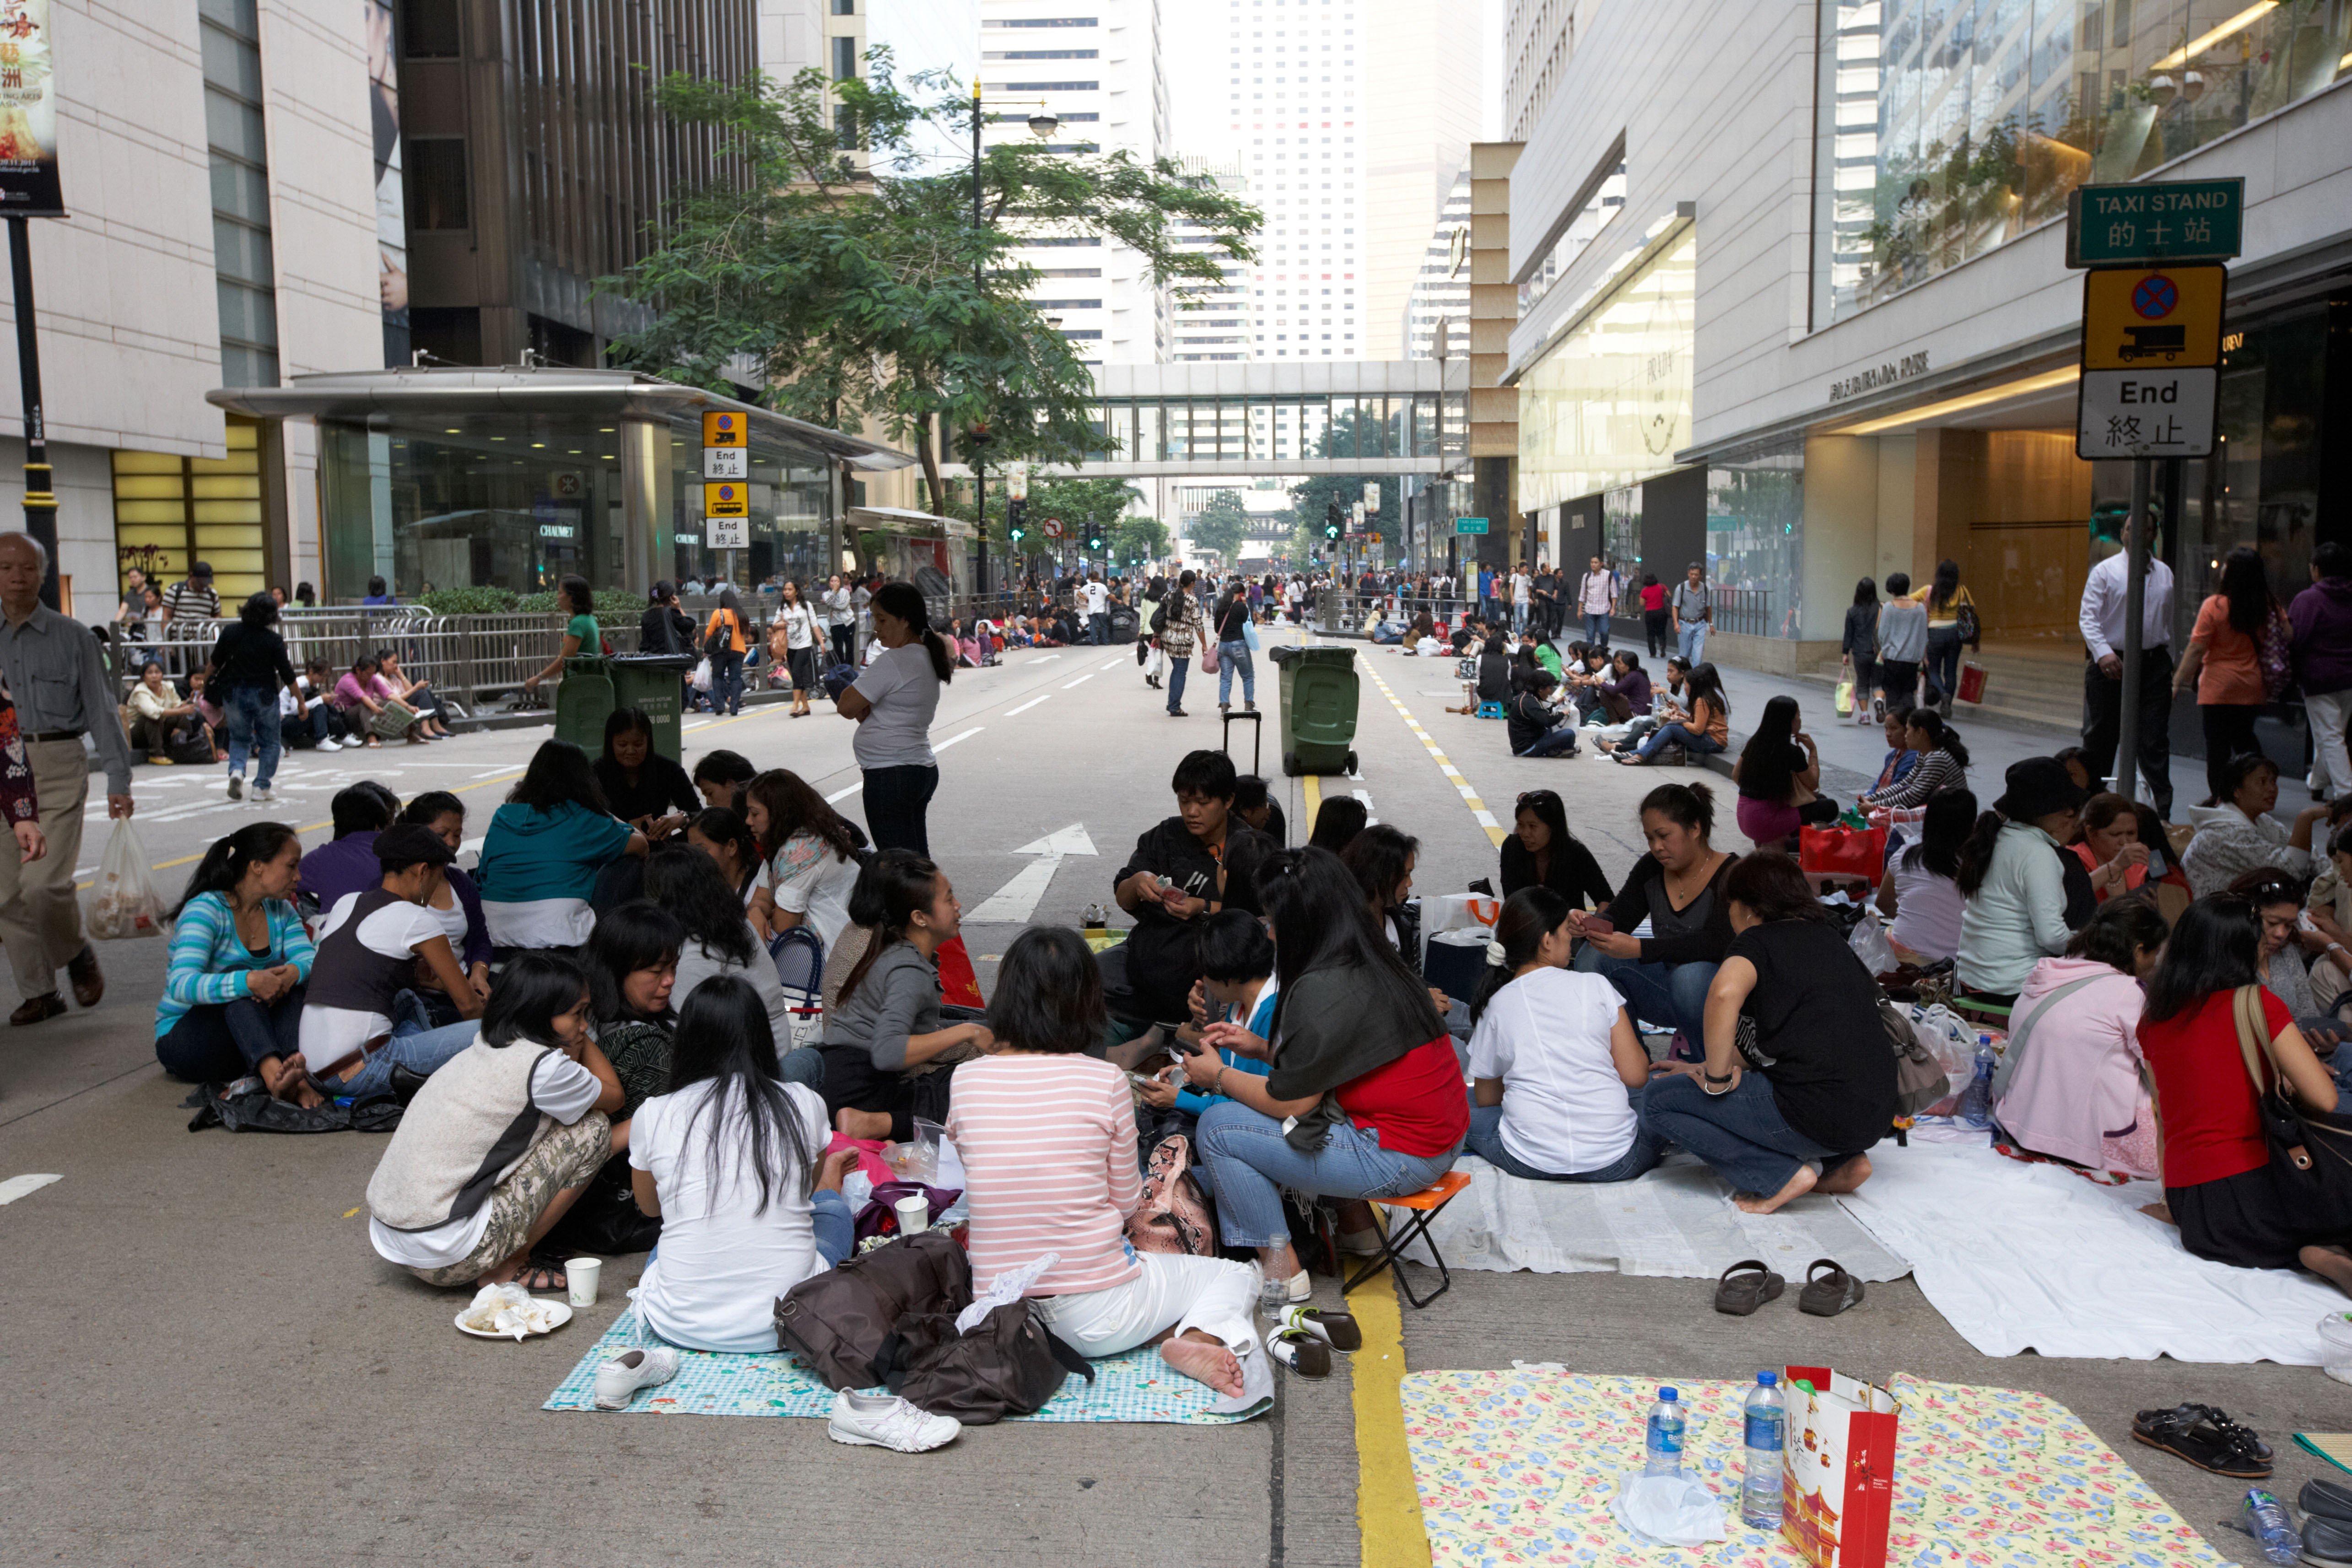 There are some 189,000 Filipino domestic workers in Hong Kong, who usually gather in Central on Sunday to catch up with their friends working in the city. Photo: Nora Tam